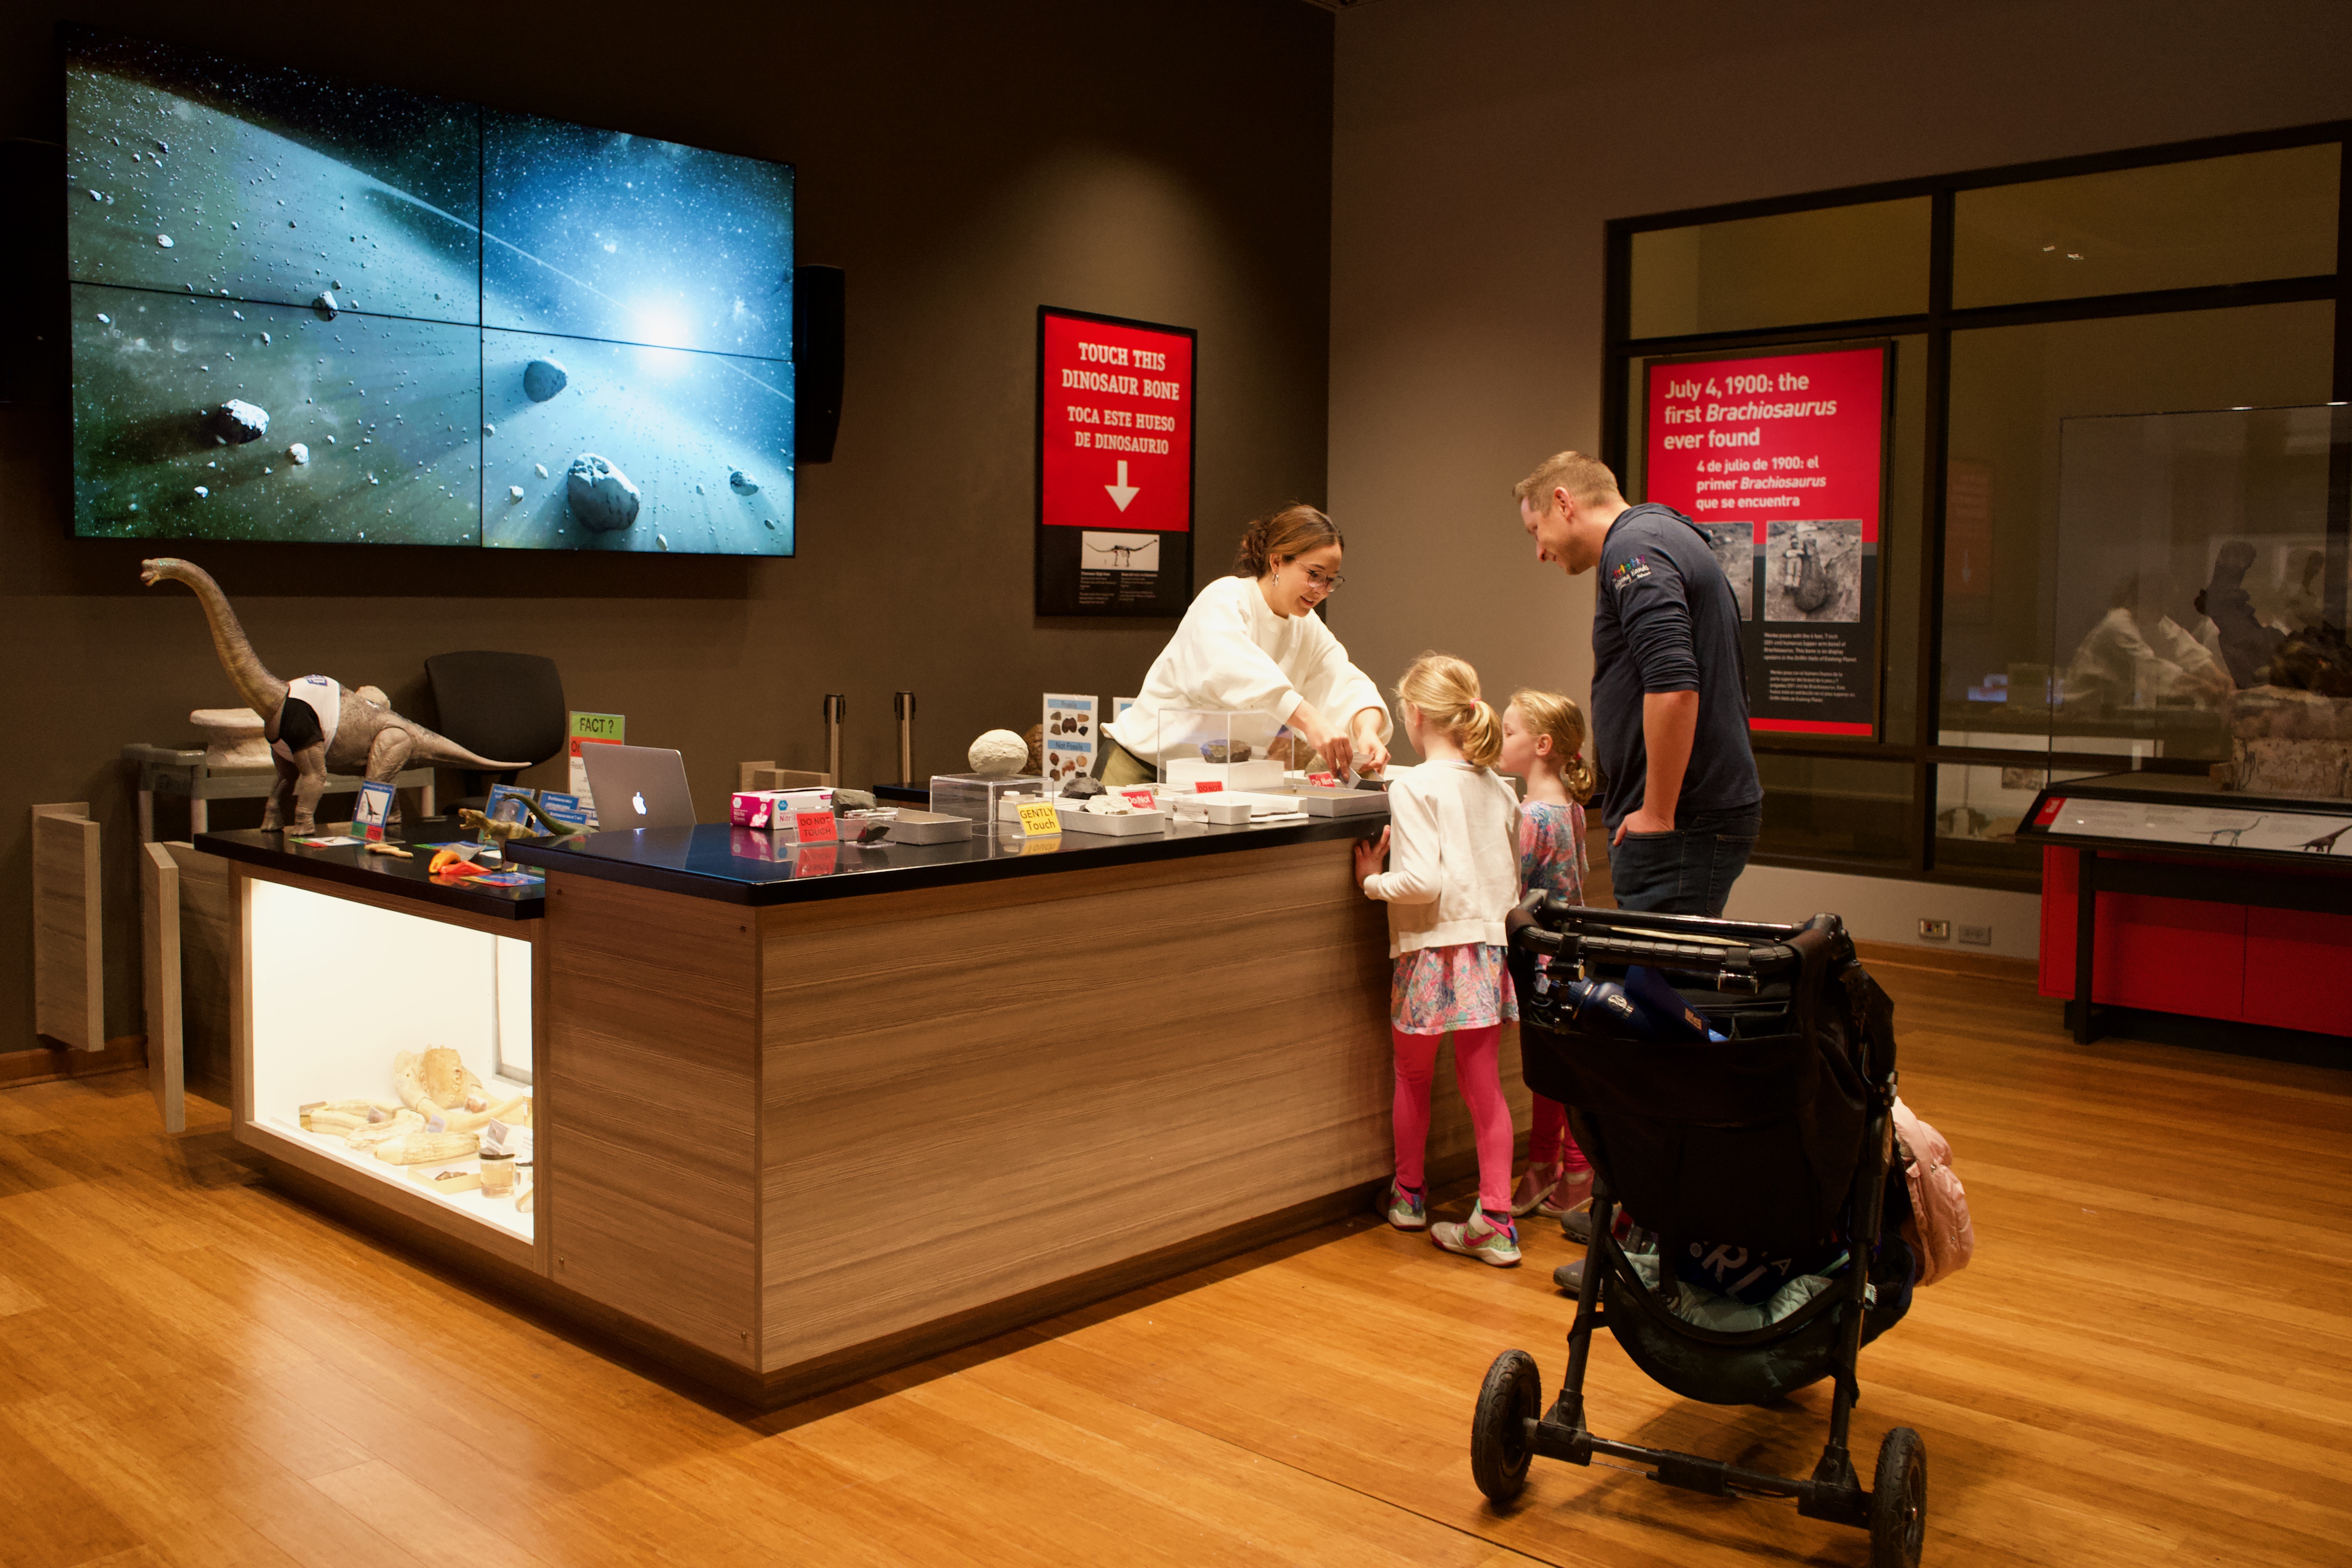 An adult and two children interact with a museum staff member who stands behind a counter in the Science Hub. On the counter are objects and specimens related to the content in the exhibit. A large video screen hangs on the wall behind the counter.